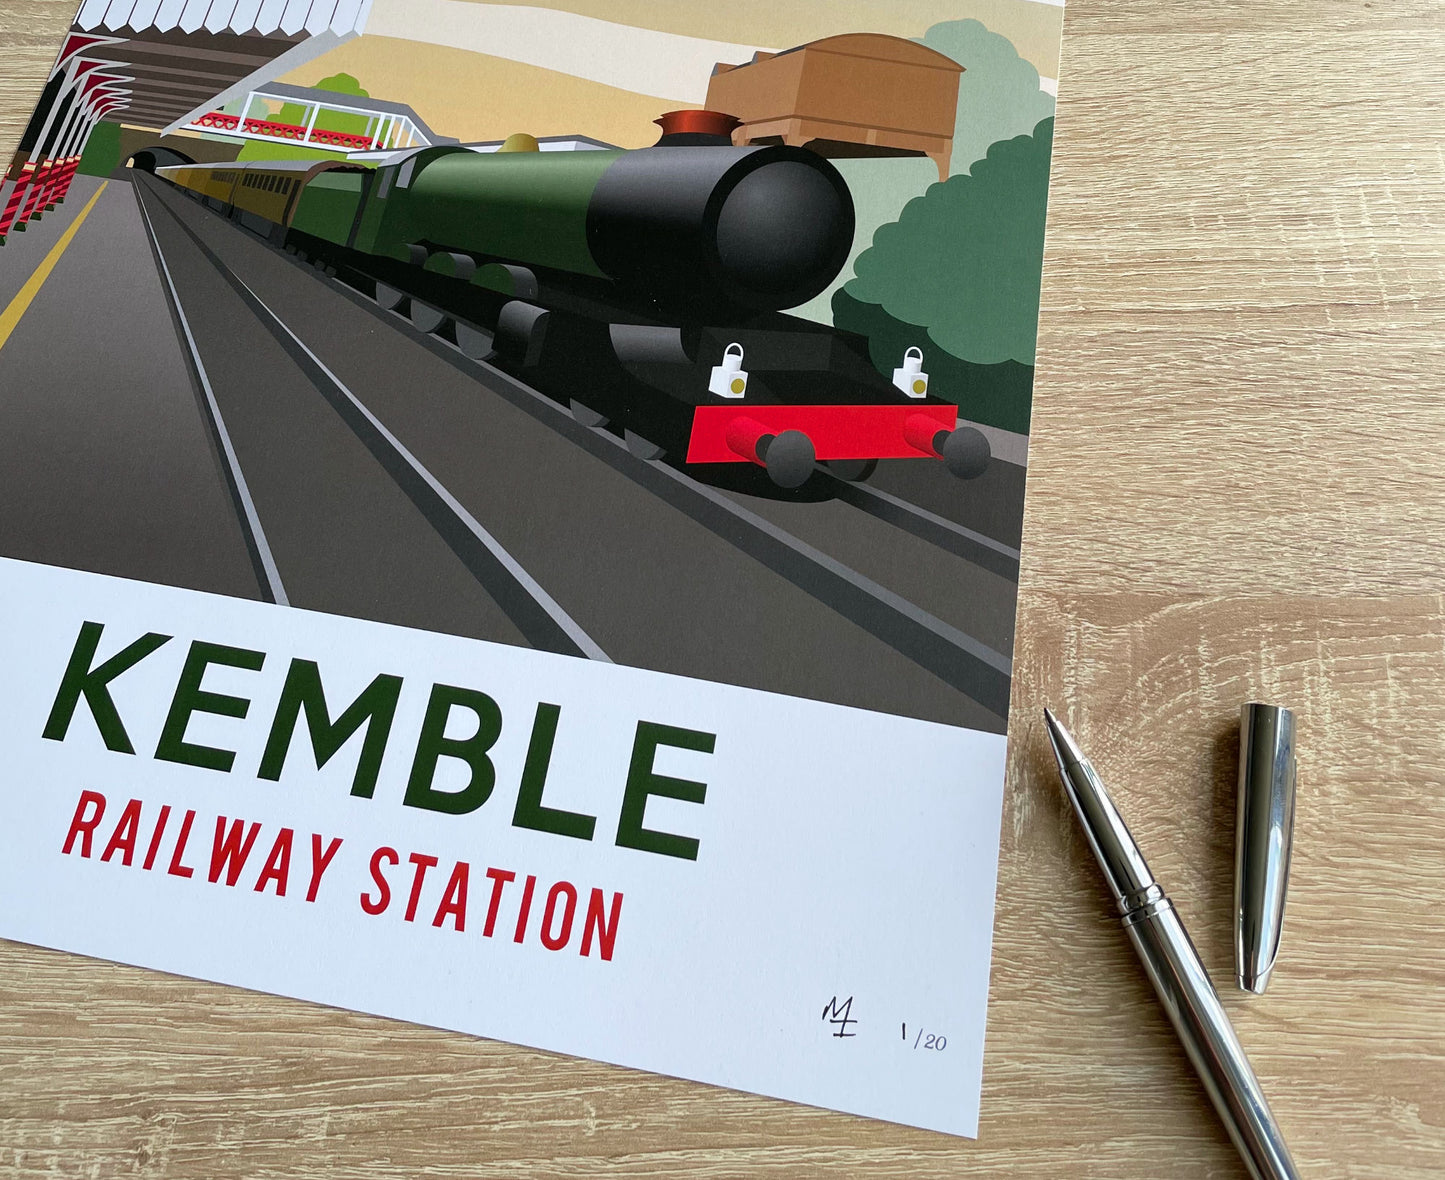 Kemble Railway Station Poster – Limited Edition!